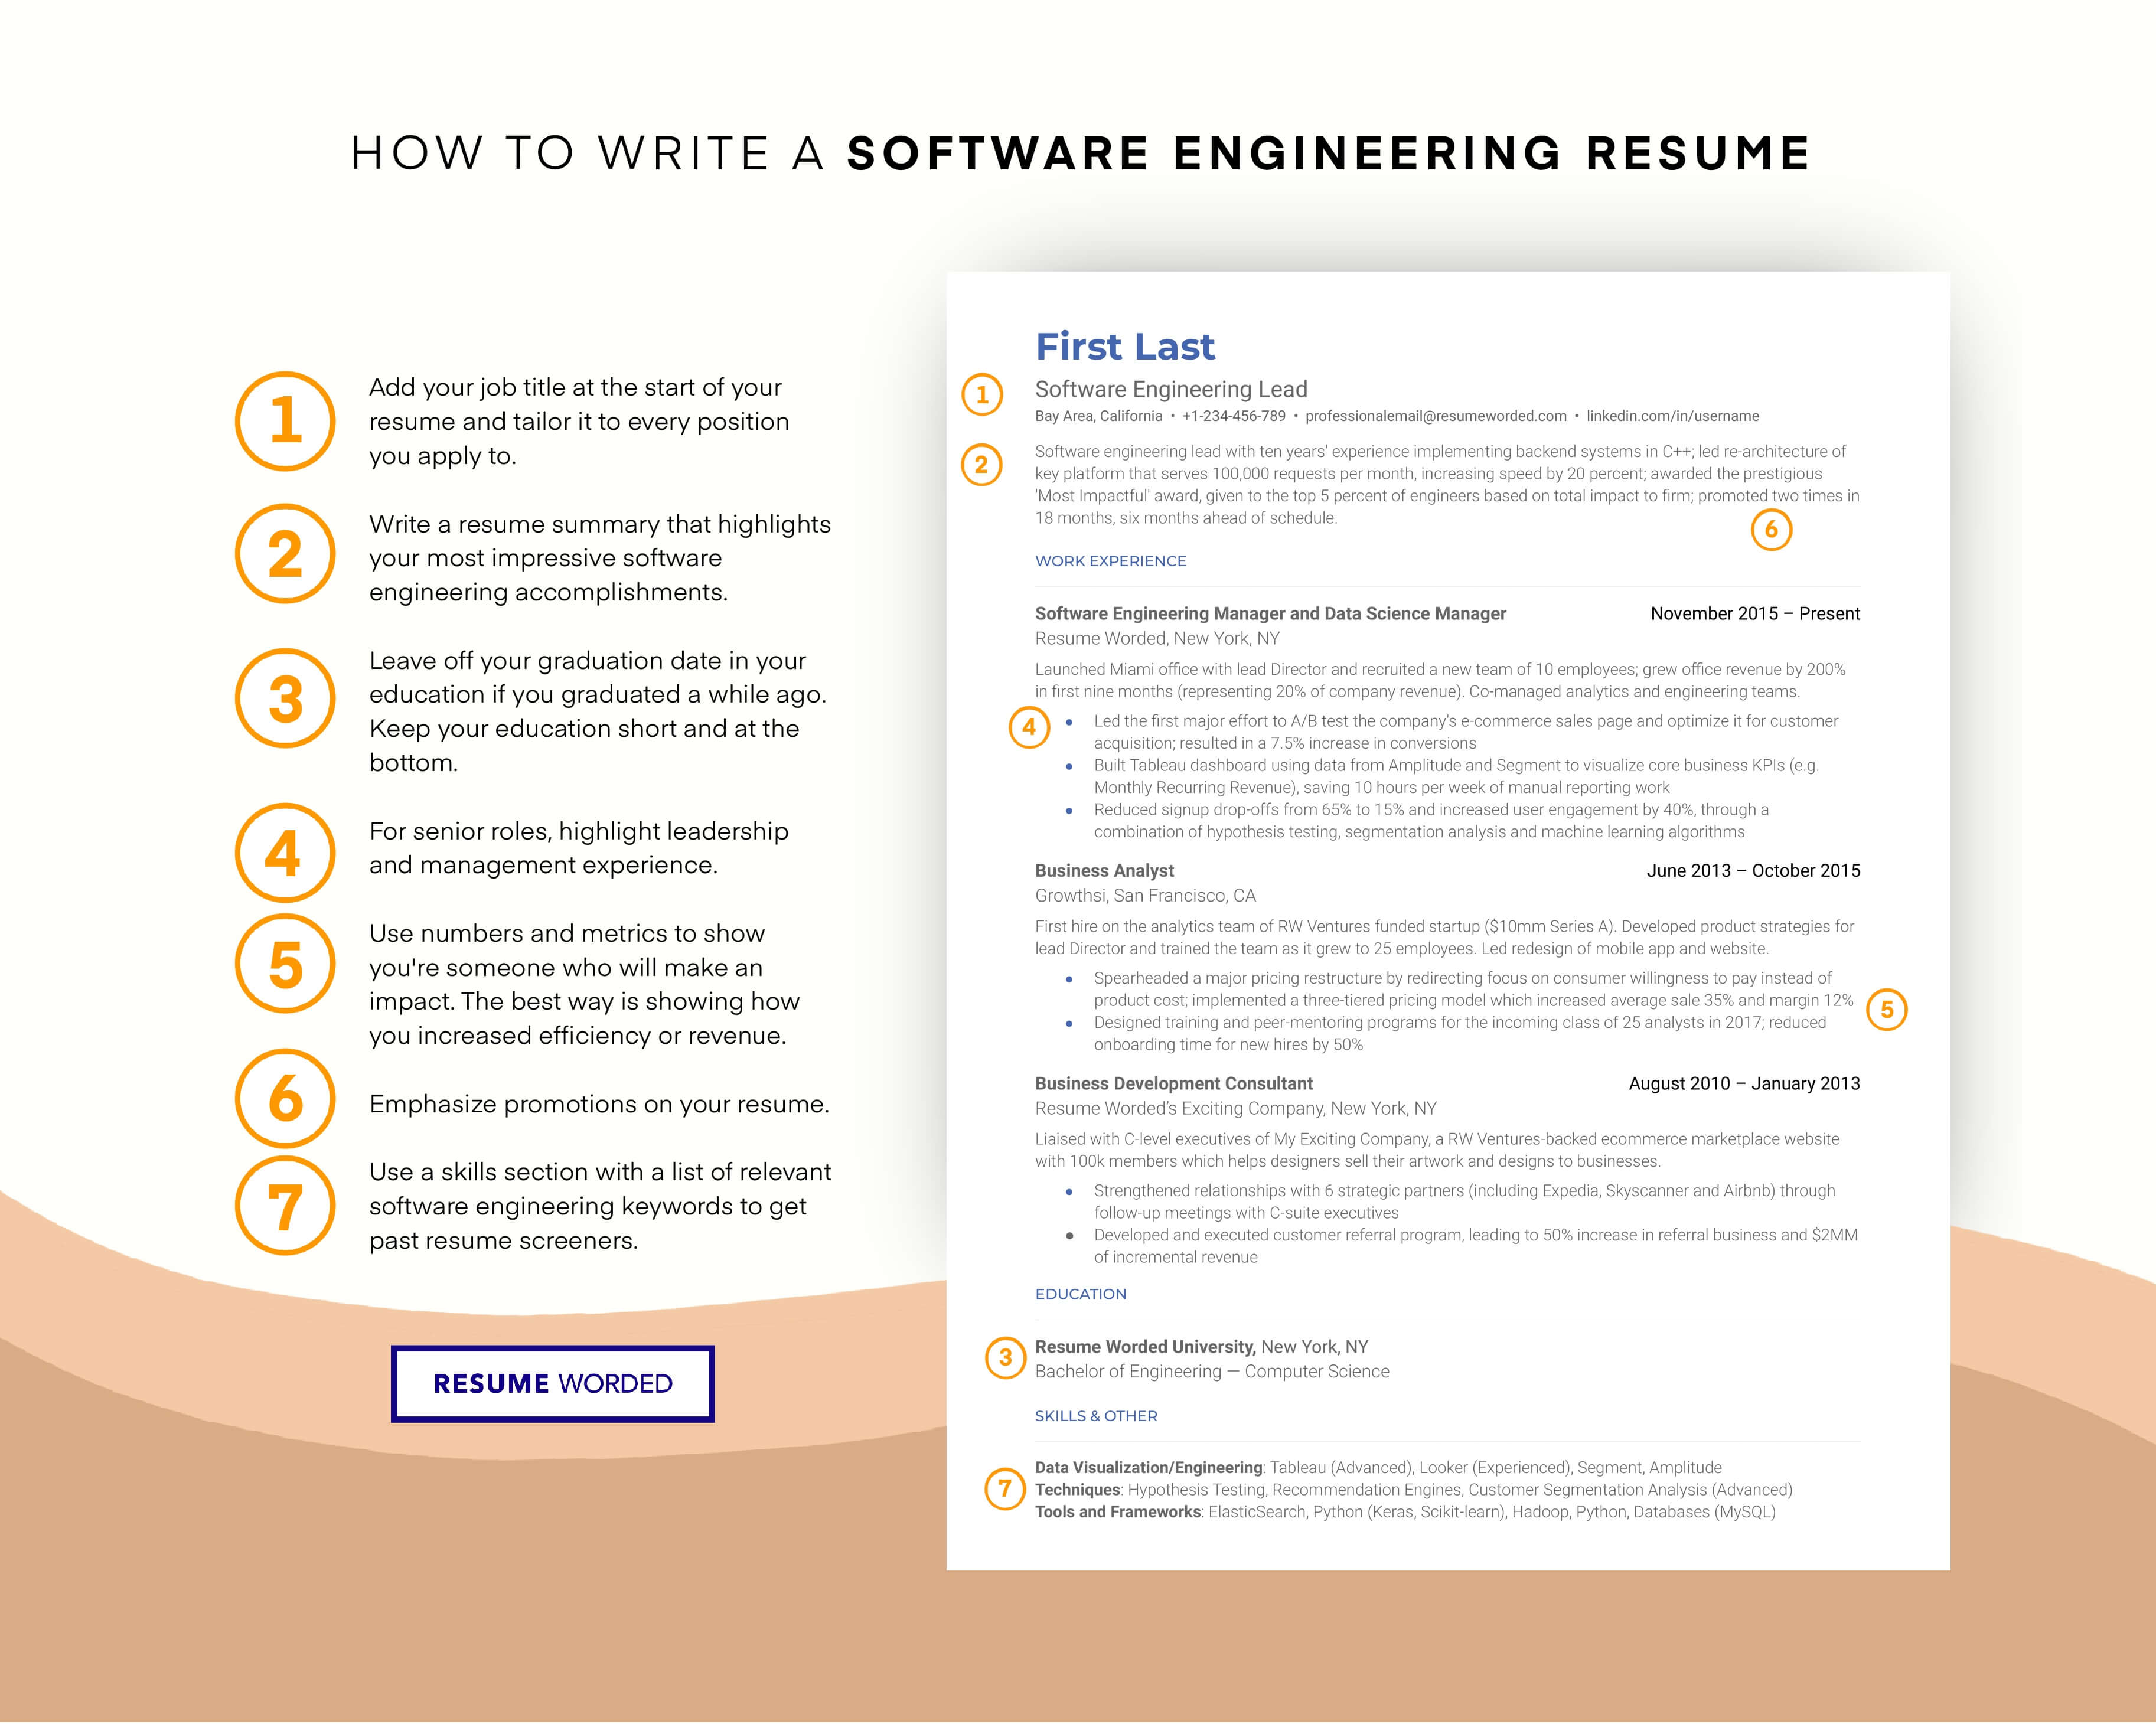 Include software-related skills. - Software Product Manager Resume